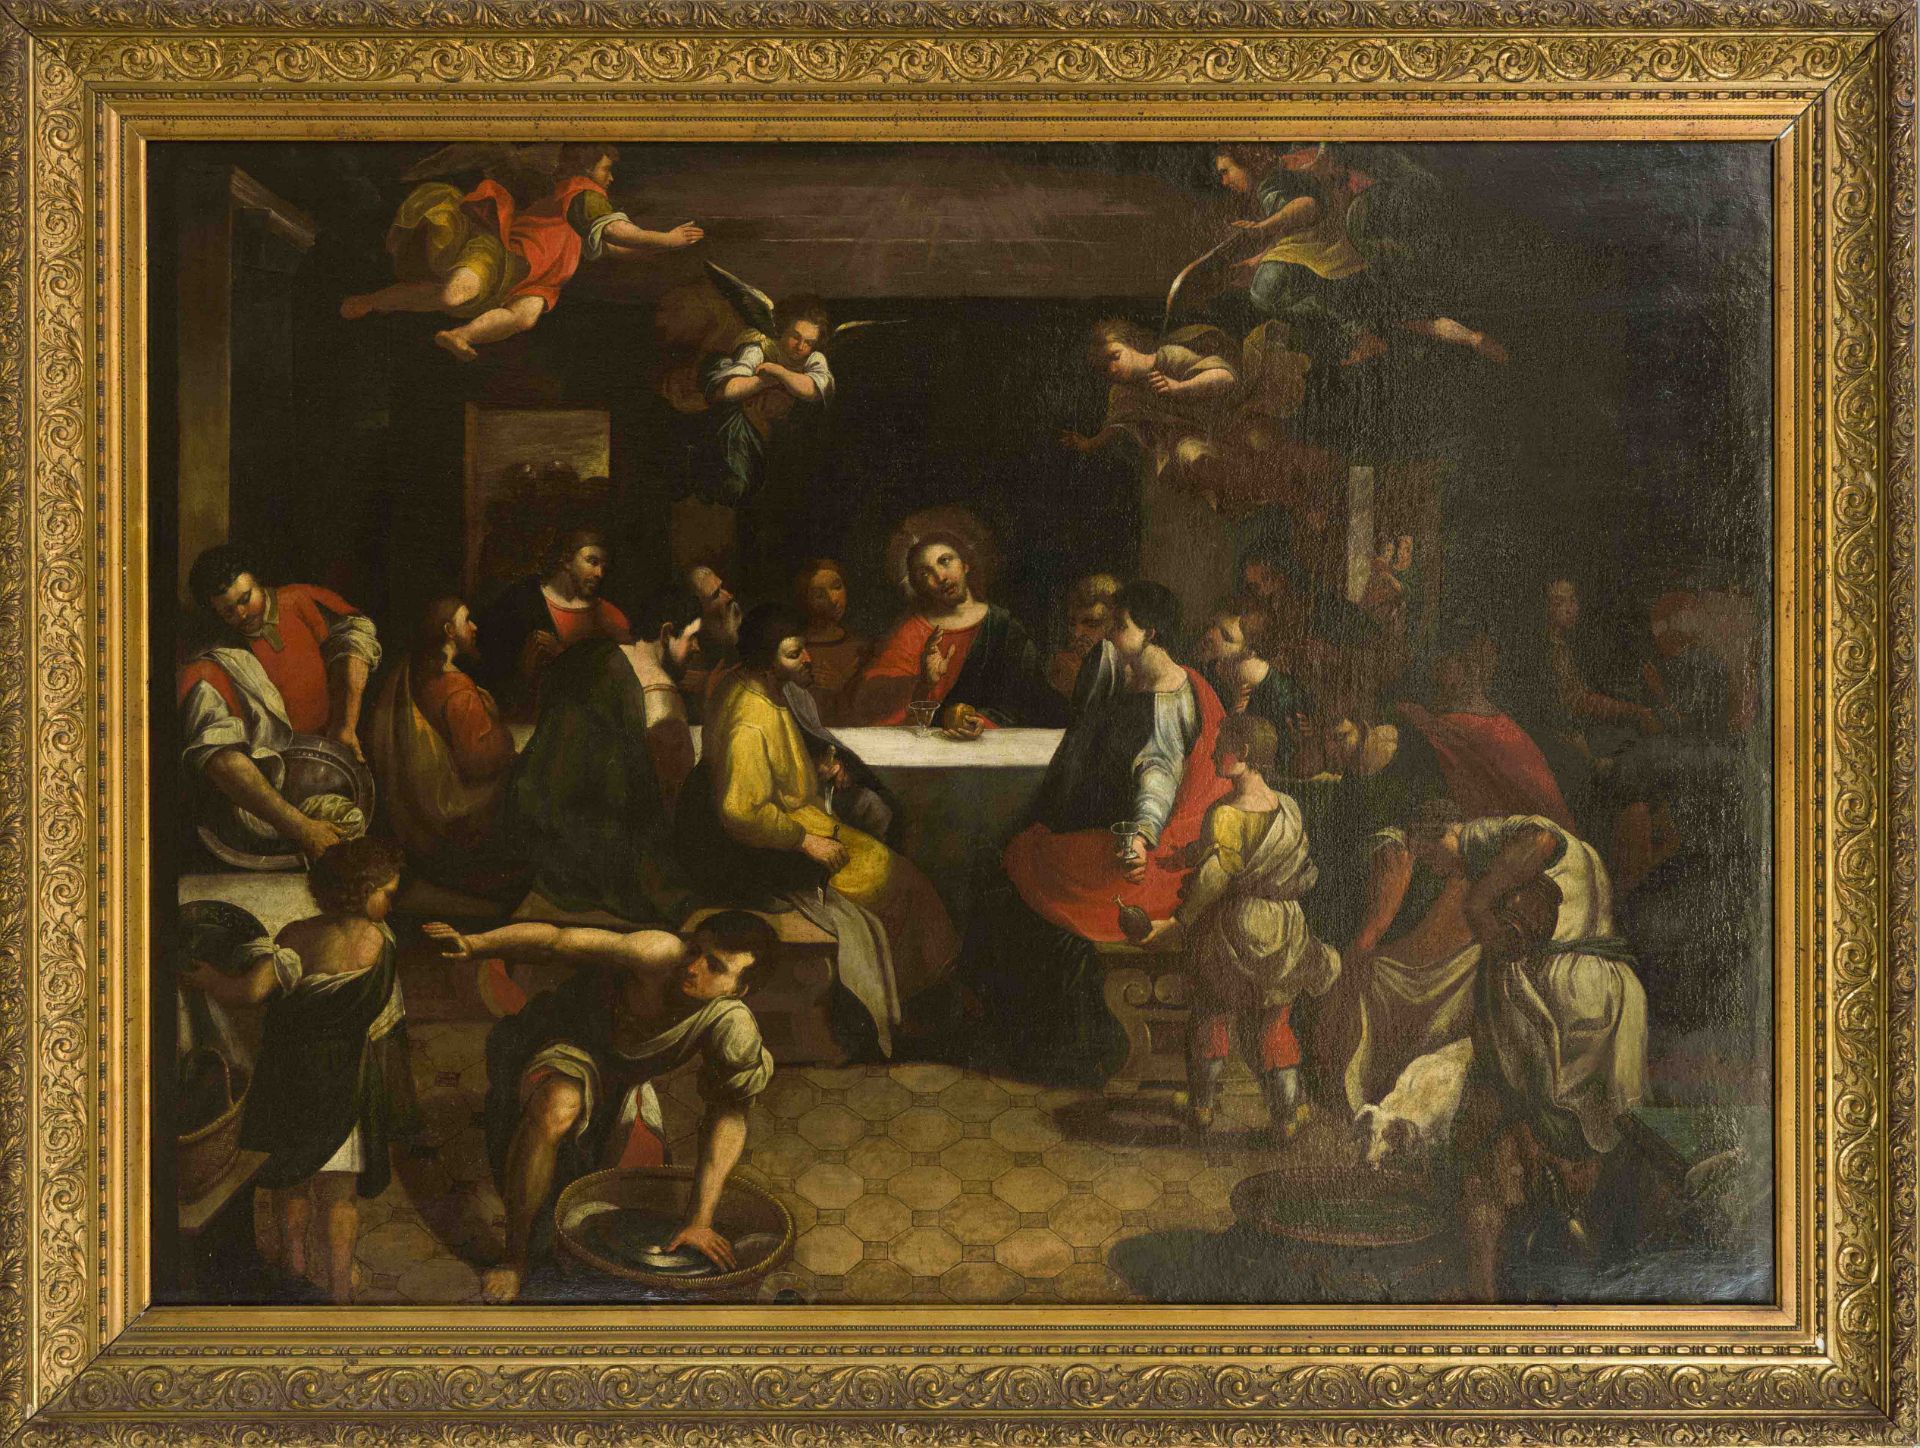 Federico Barocci (1535-1612), copy after ''The Last Supper'', large-format, anonymous copy of the